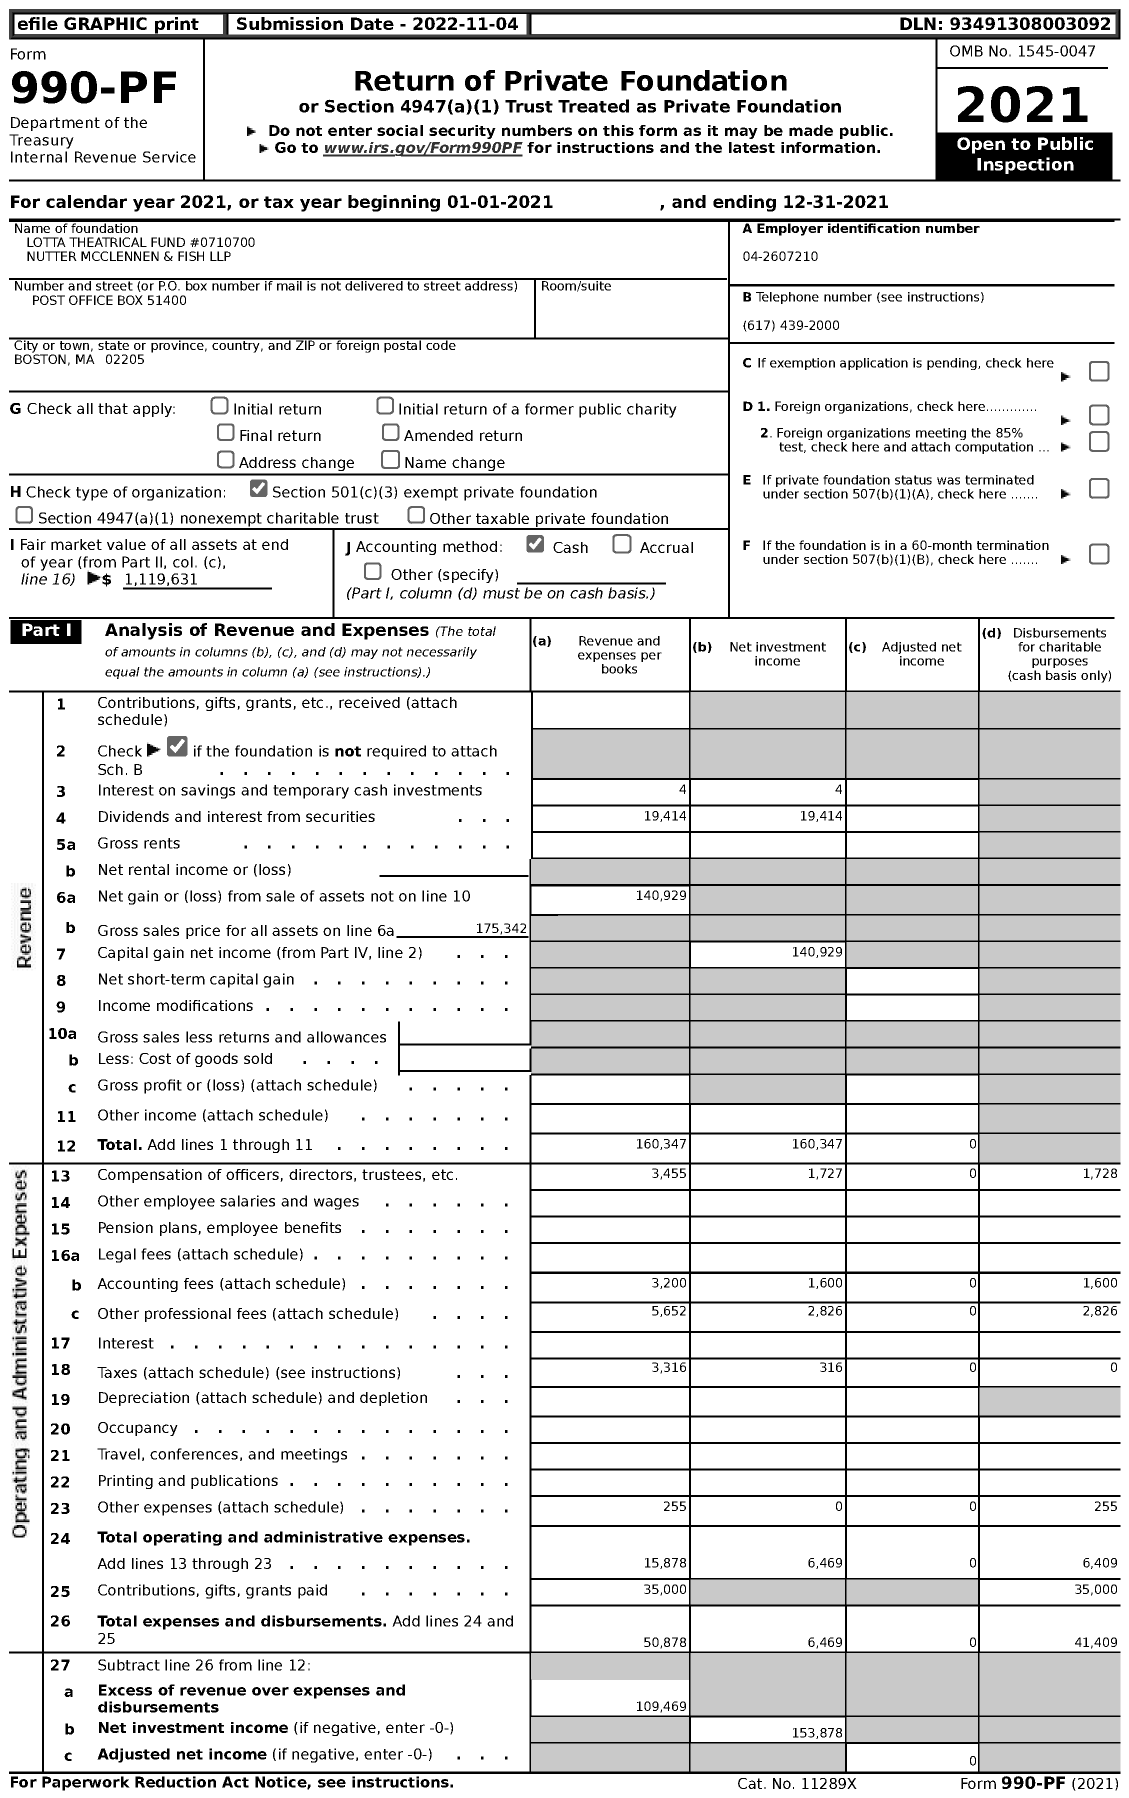 Image of first page of 2021 Form 990PF for Lotta Theatrical Fund #0710700 Nutter Mcclennen and Fish LLP